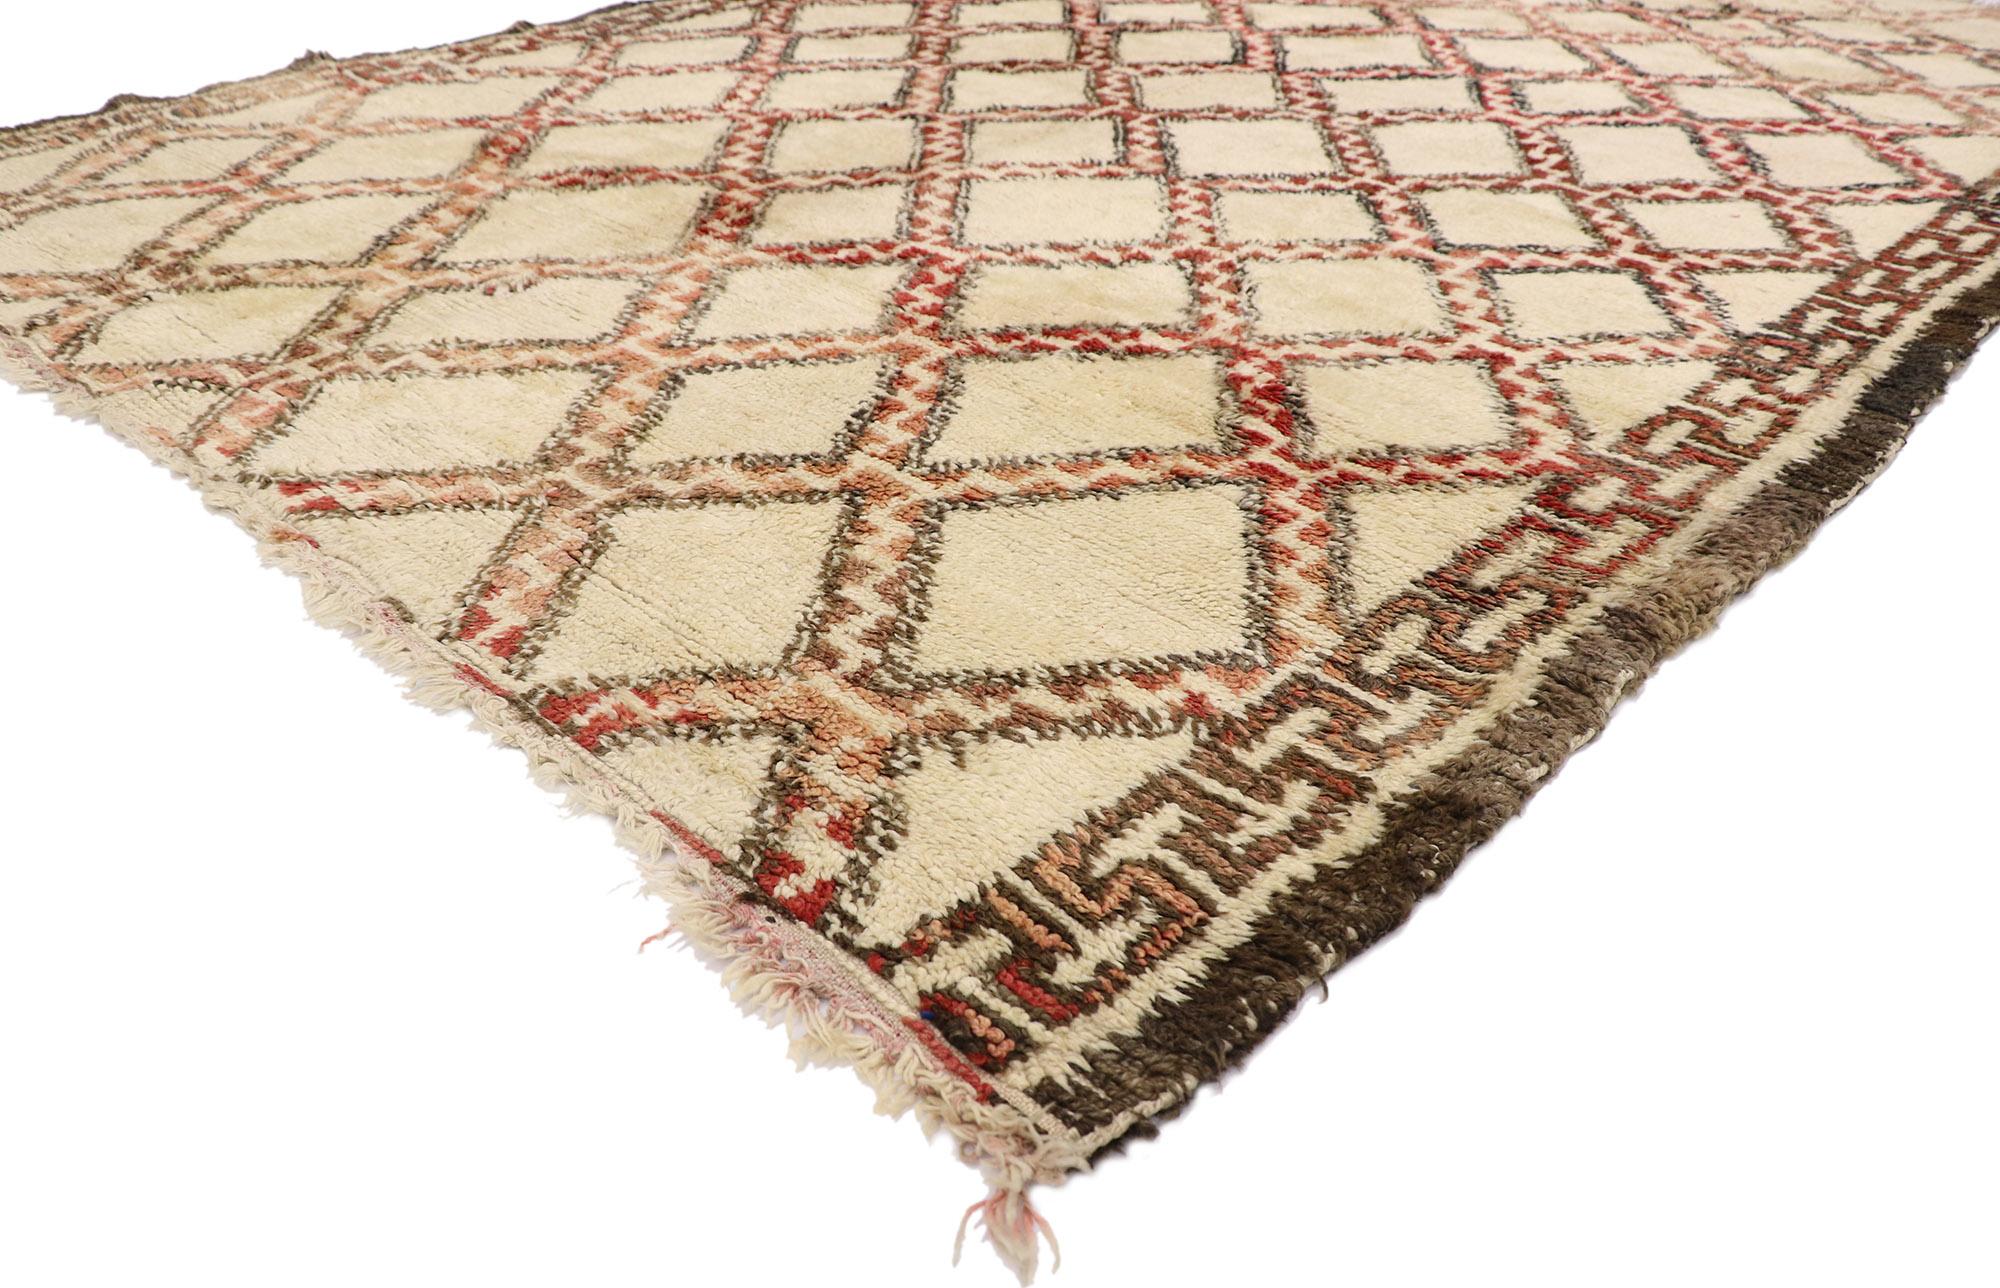 21411 vintage Berber Moroccan Beni Ourain rug 07'00 x 10'05. ?With its simplicity, plush pile and Mid-Century Modern style, this hand knotted wool vintage Berber Beni Ourain Moroccan rug is a captivating vision of woven beauty. It features a lozenge